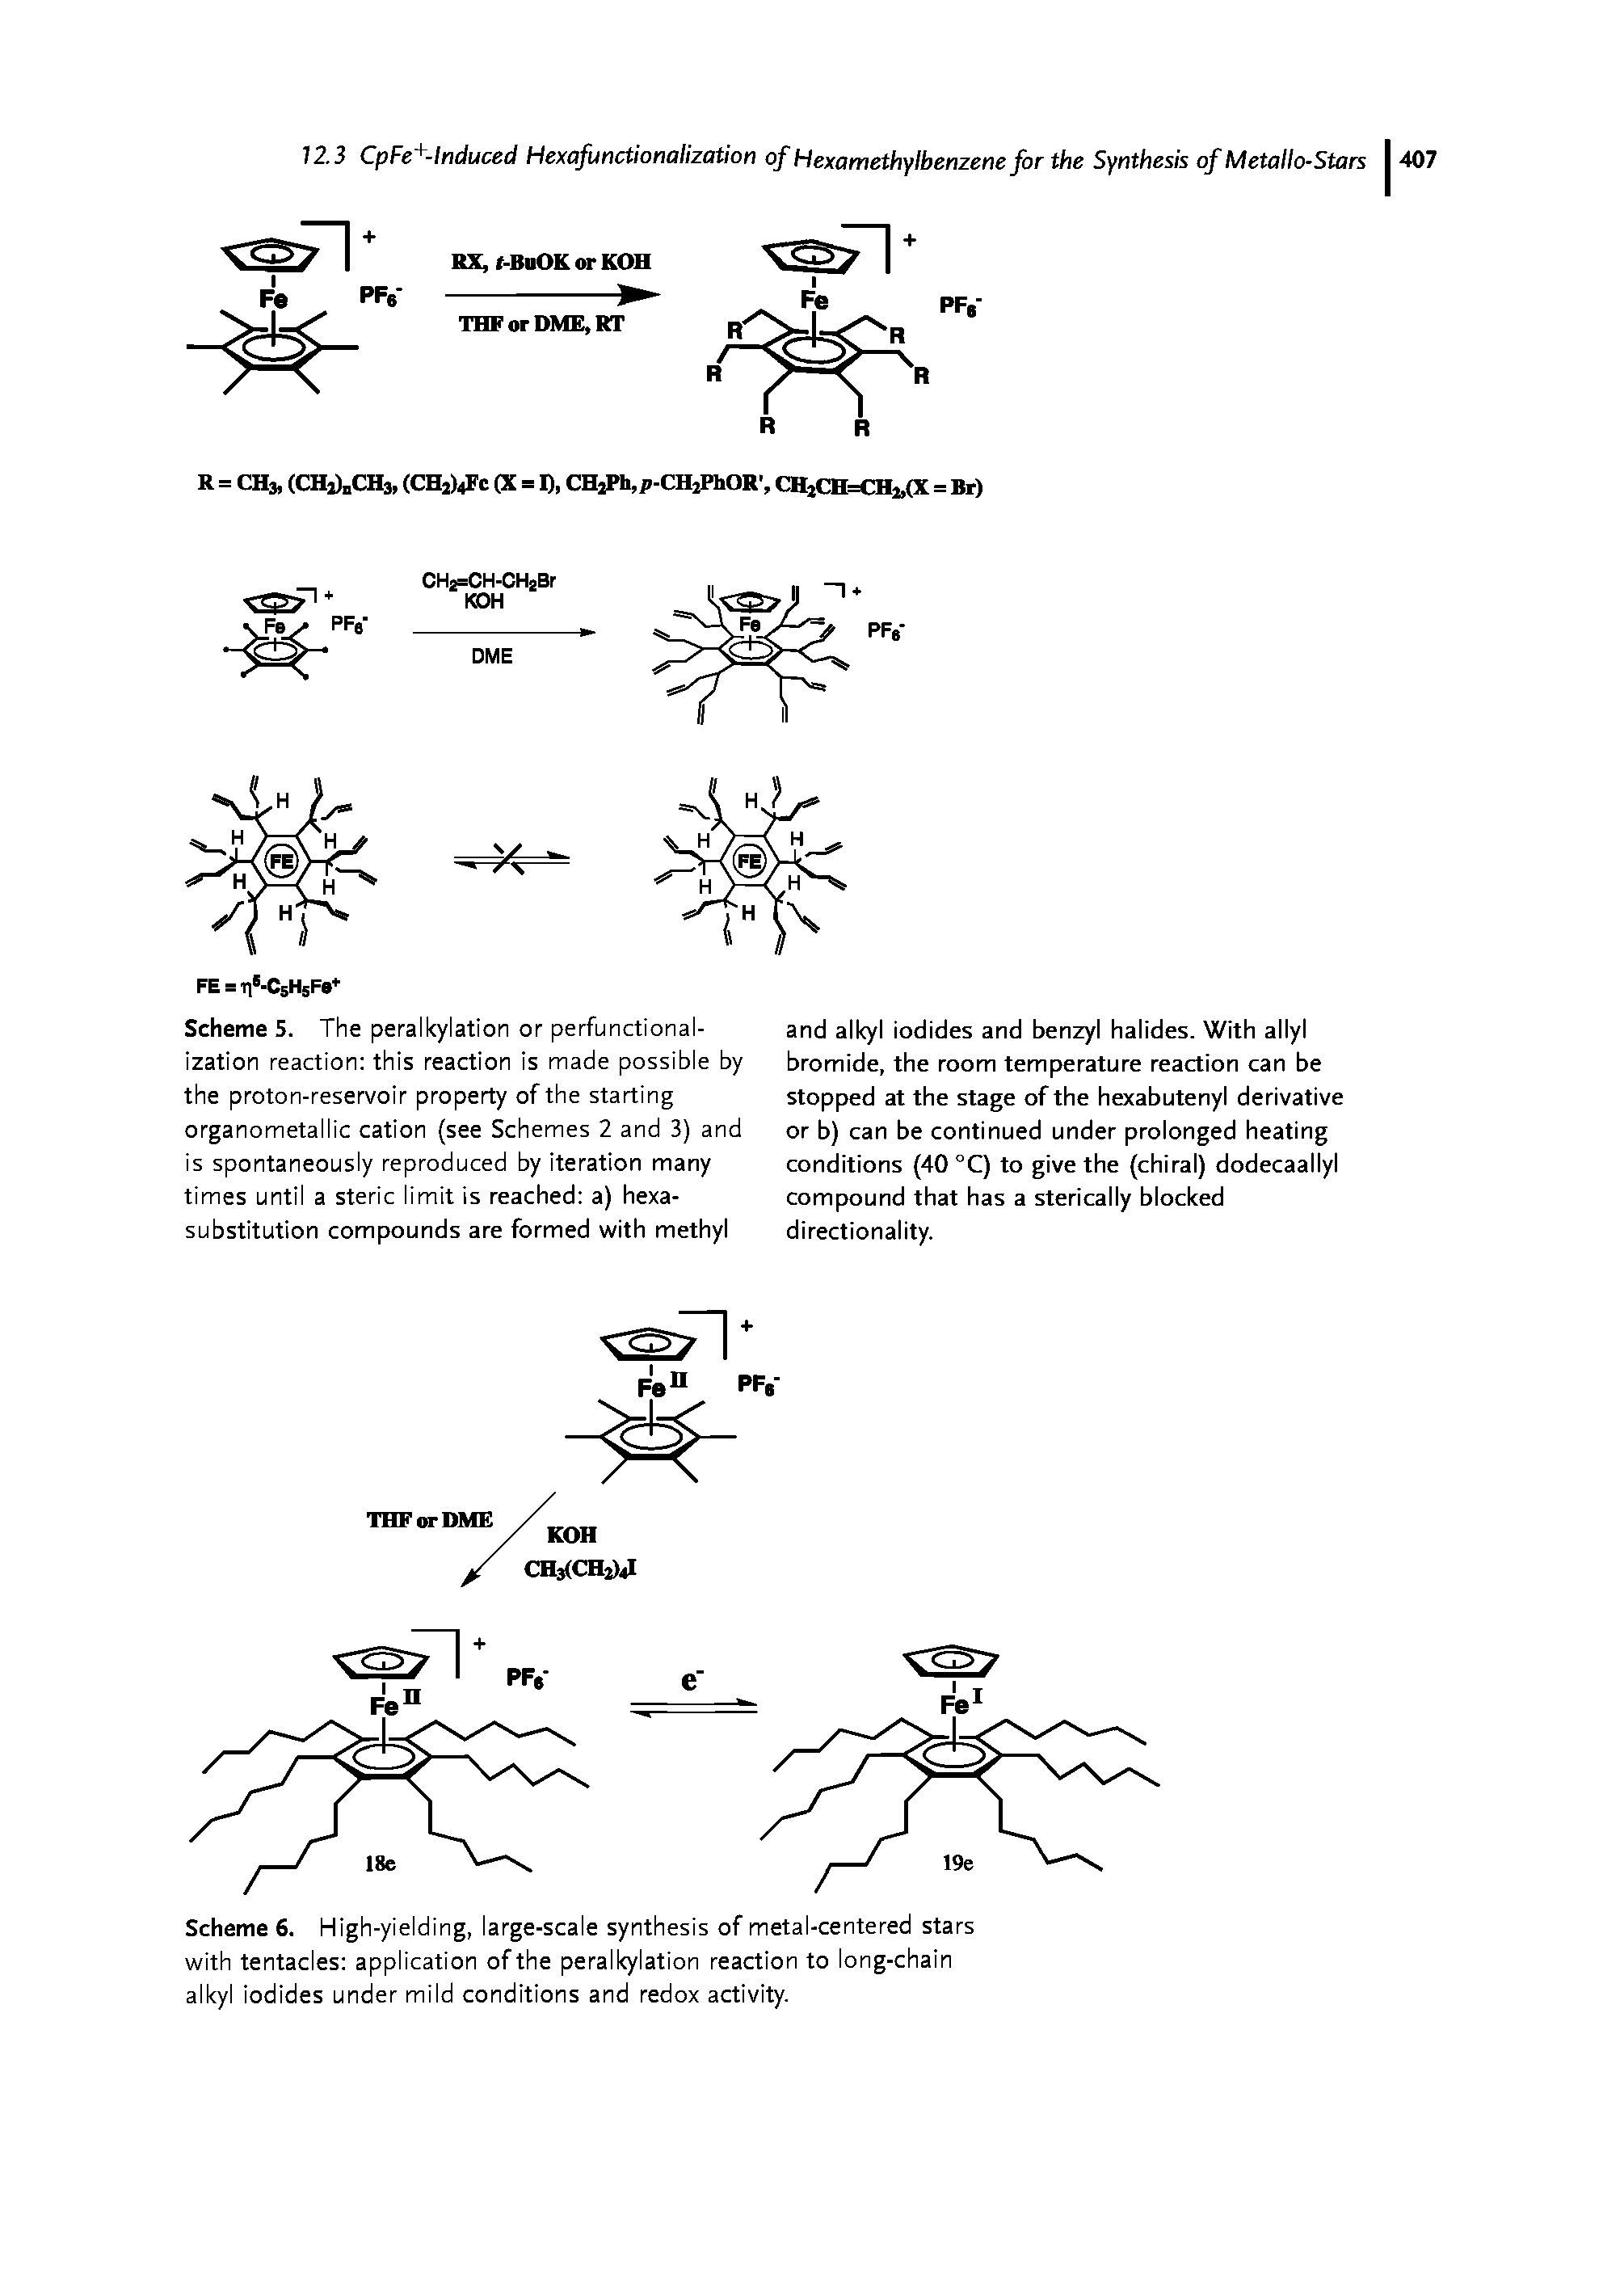 Scheme 5. The peralkylation or perfunctional-ization reaction this reaction is made possible by the proton-reservoir property of the starting organometallic cation (see Schemes 2 and 3) and is spontaneously reproduced by iteration many times until a steric limit is reached a) hexa-substitution compounds are formed with methyl...